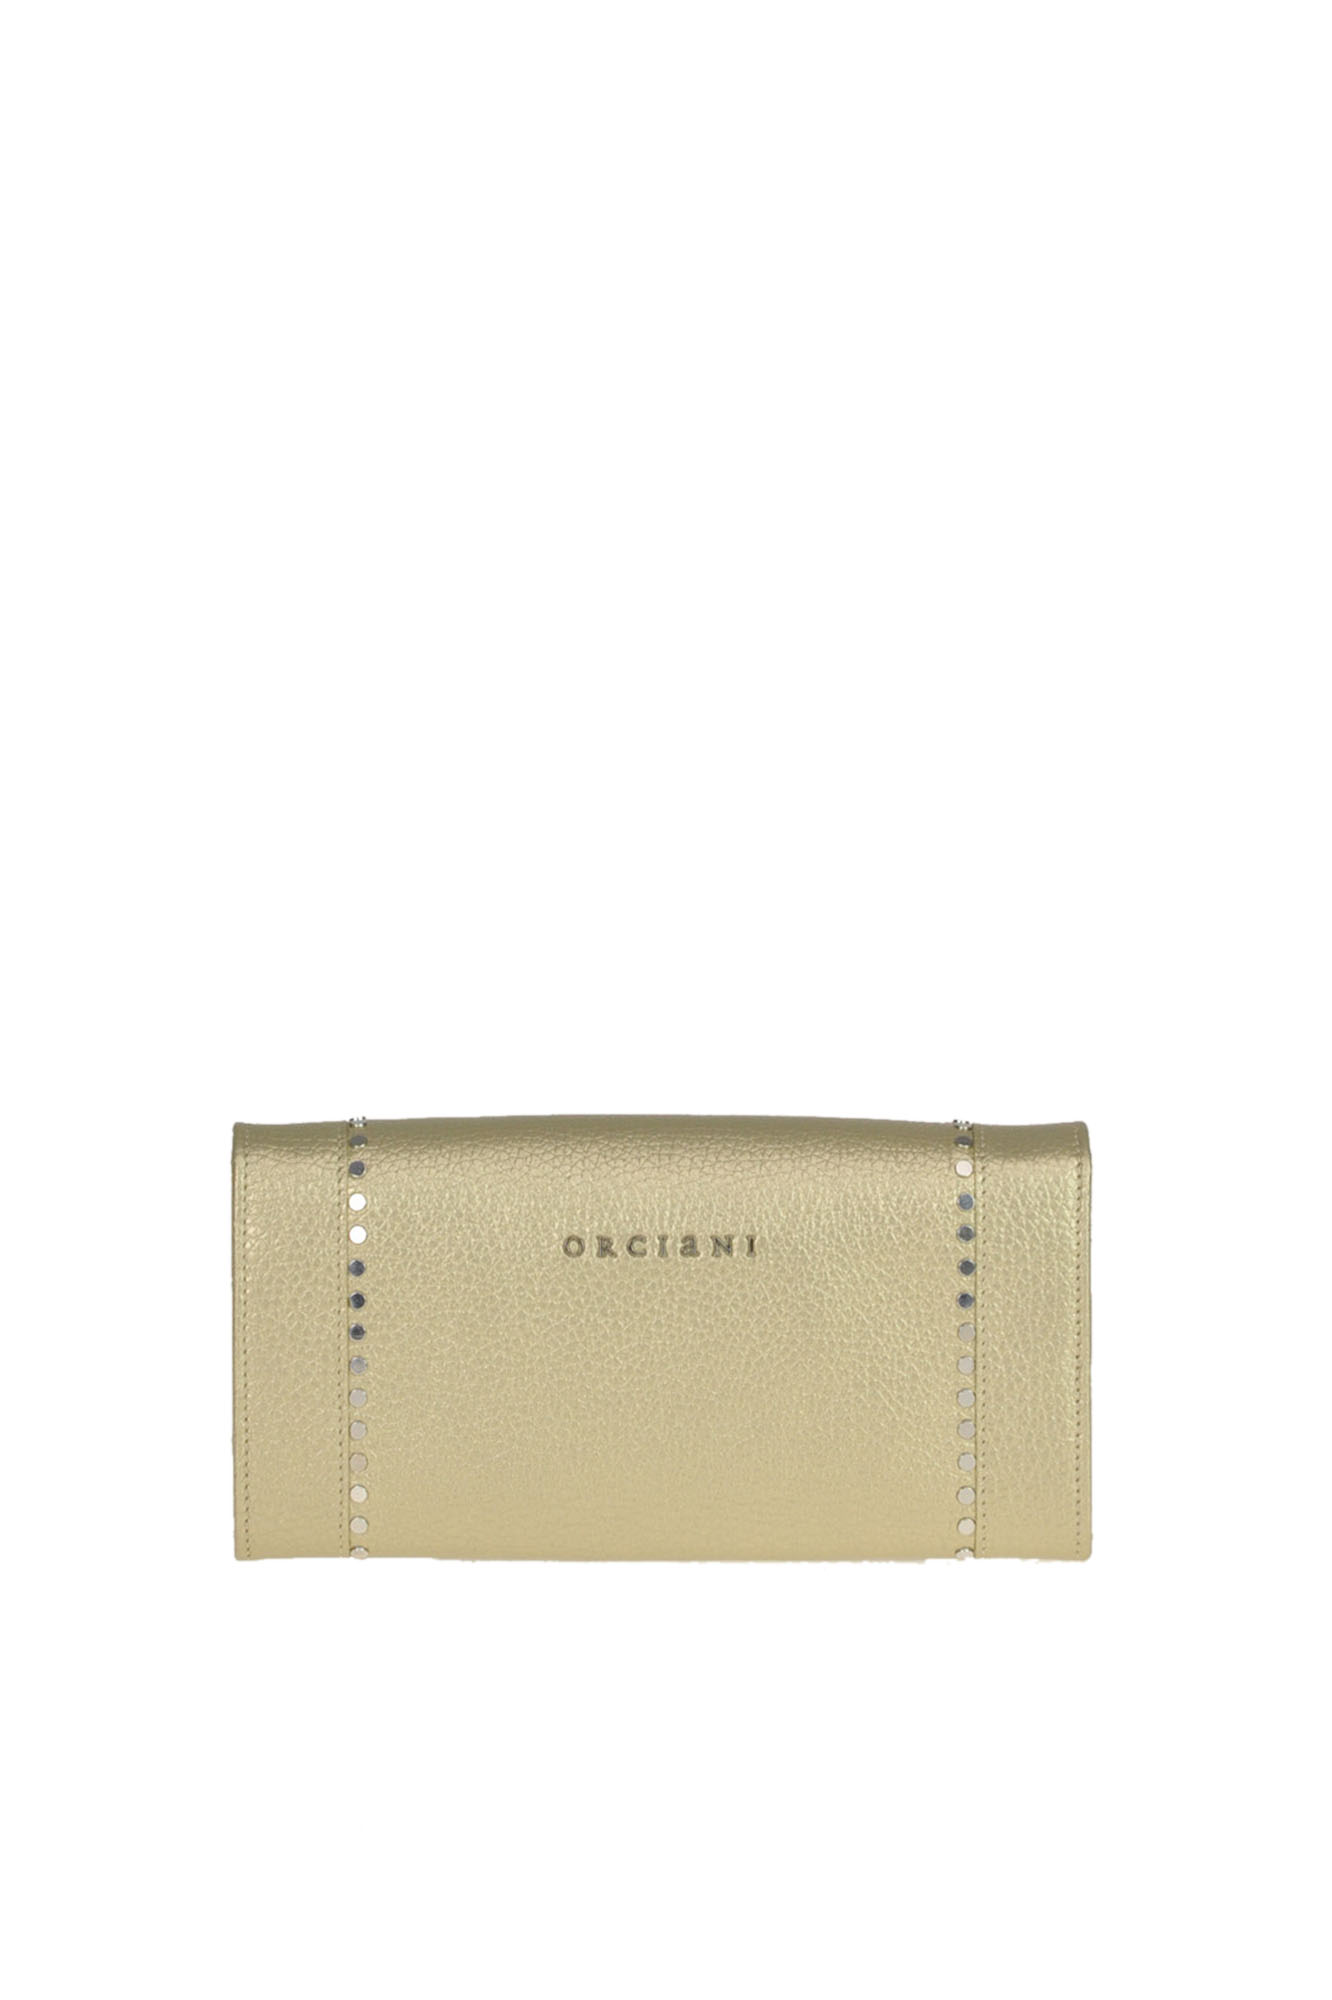 ORCIANI METALLIC EFFECT LEATHER WALLET WITH STUDS